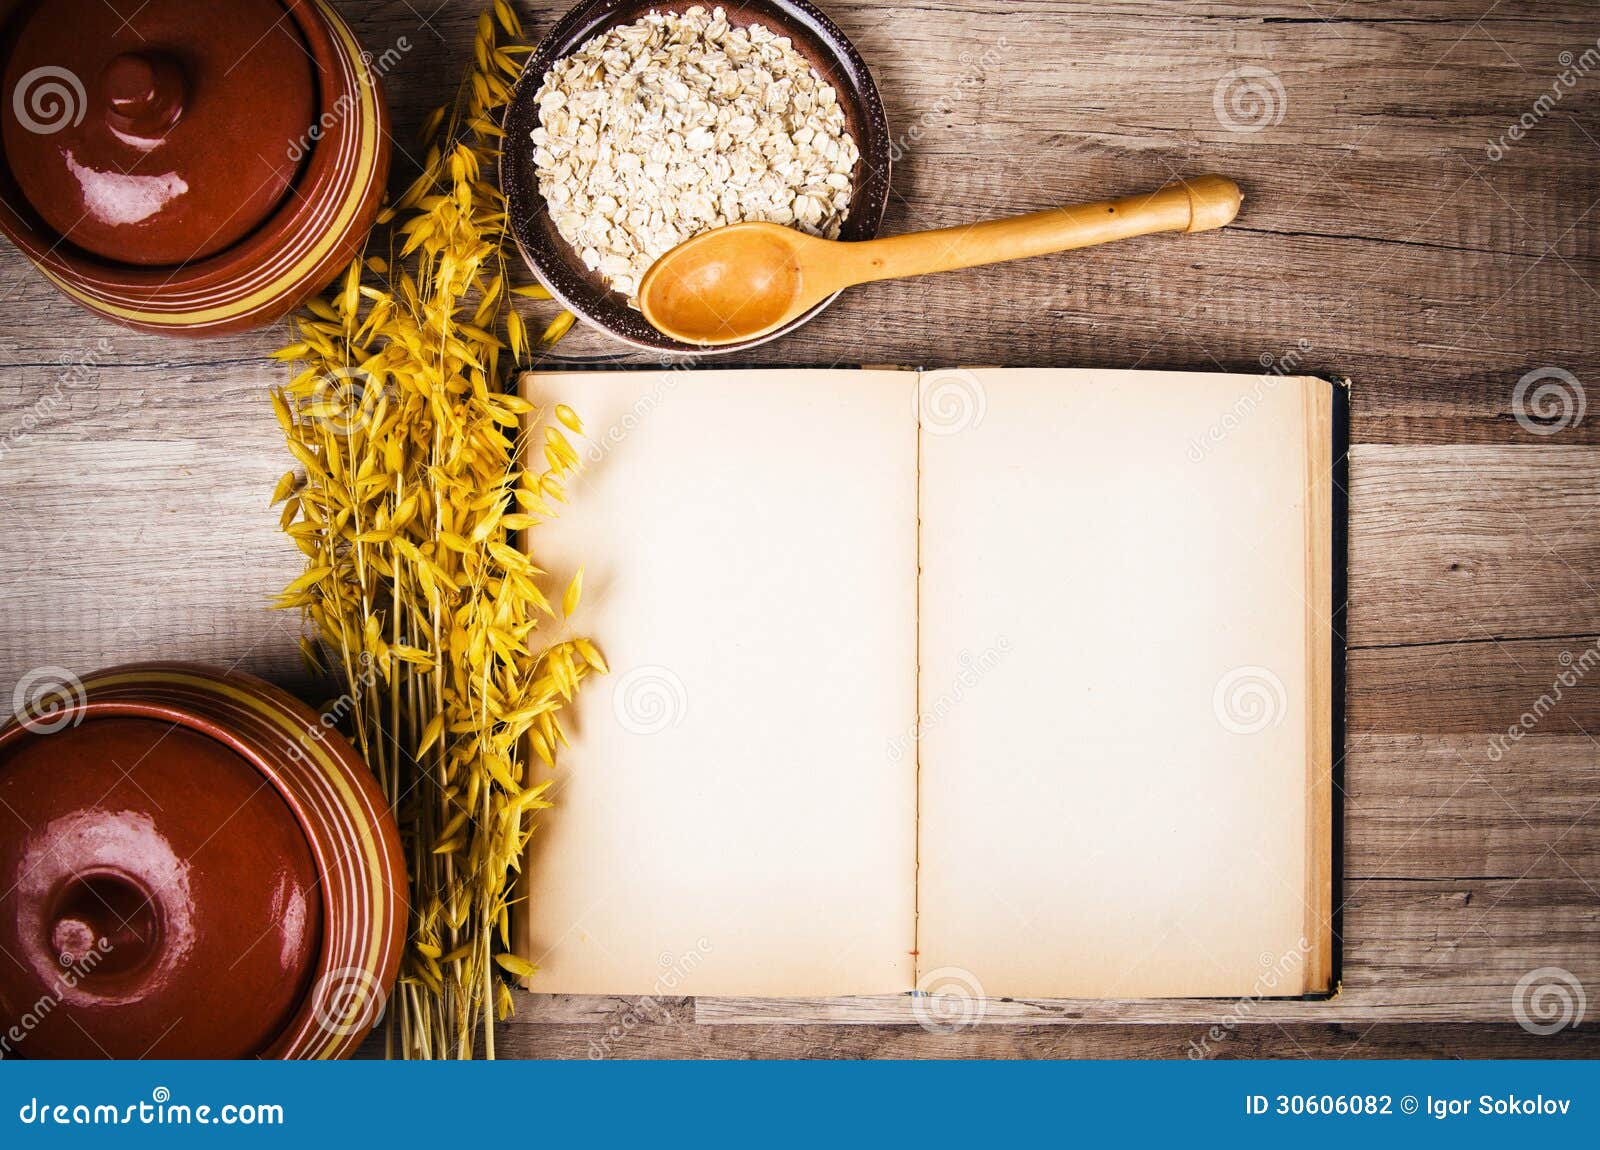 Oatmeal and an Old Recipe Book on the Kitchen Stock Photo - Image of ...